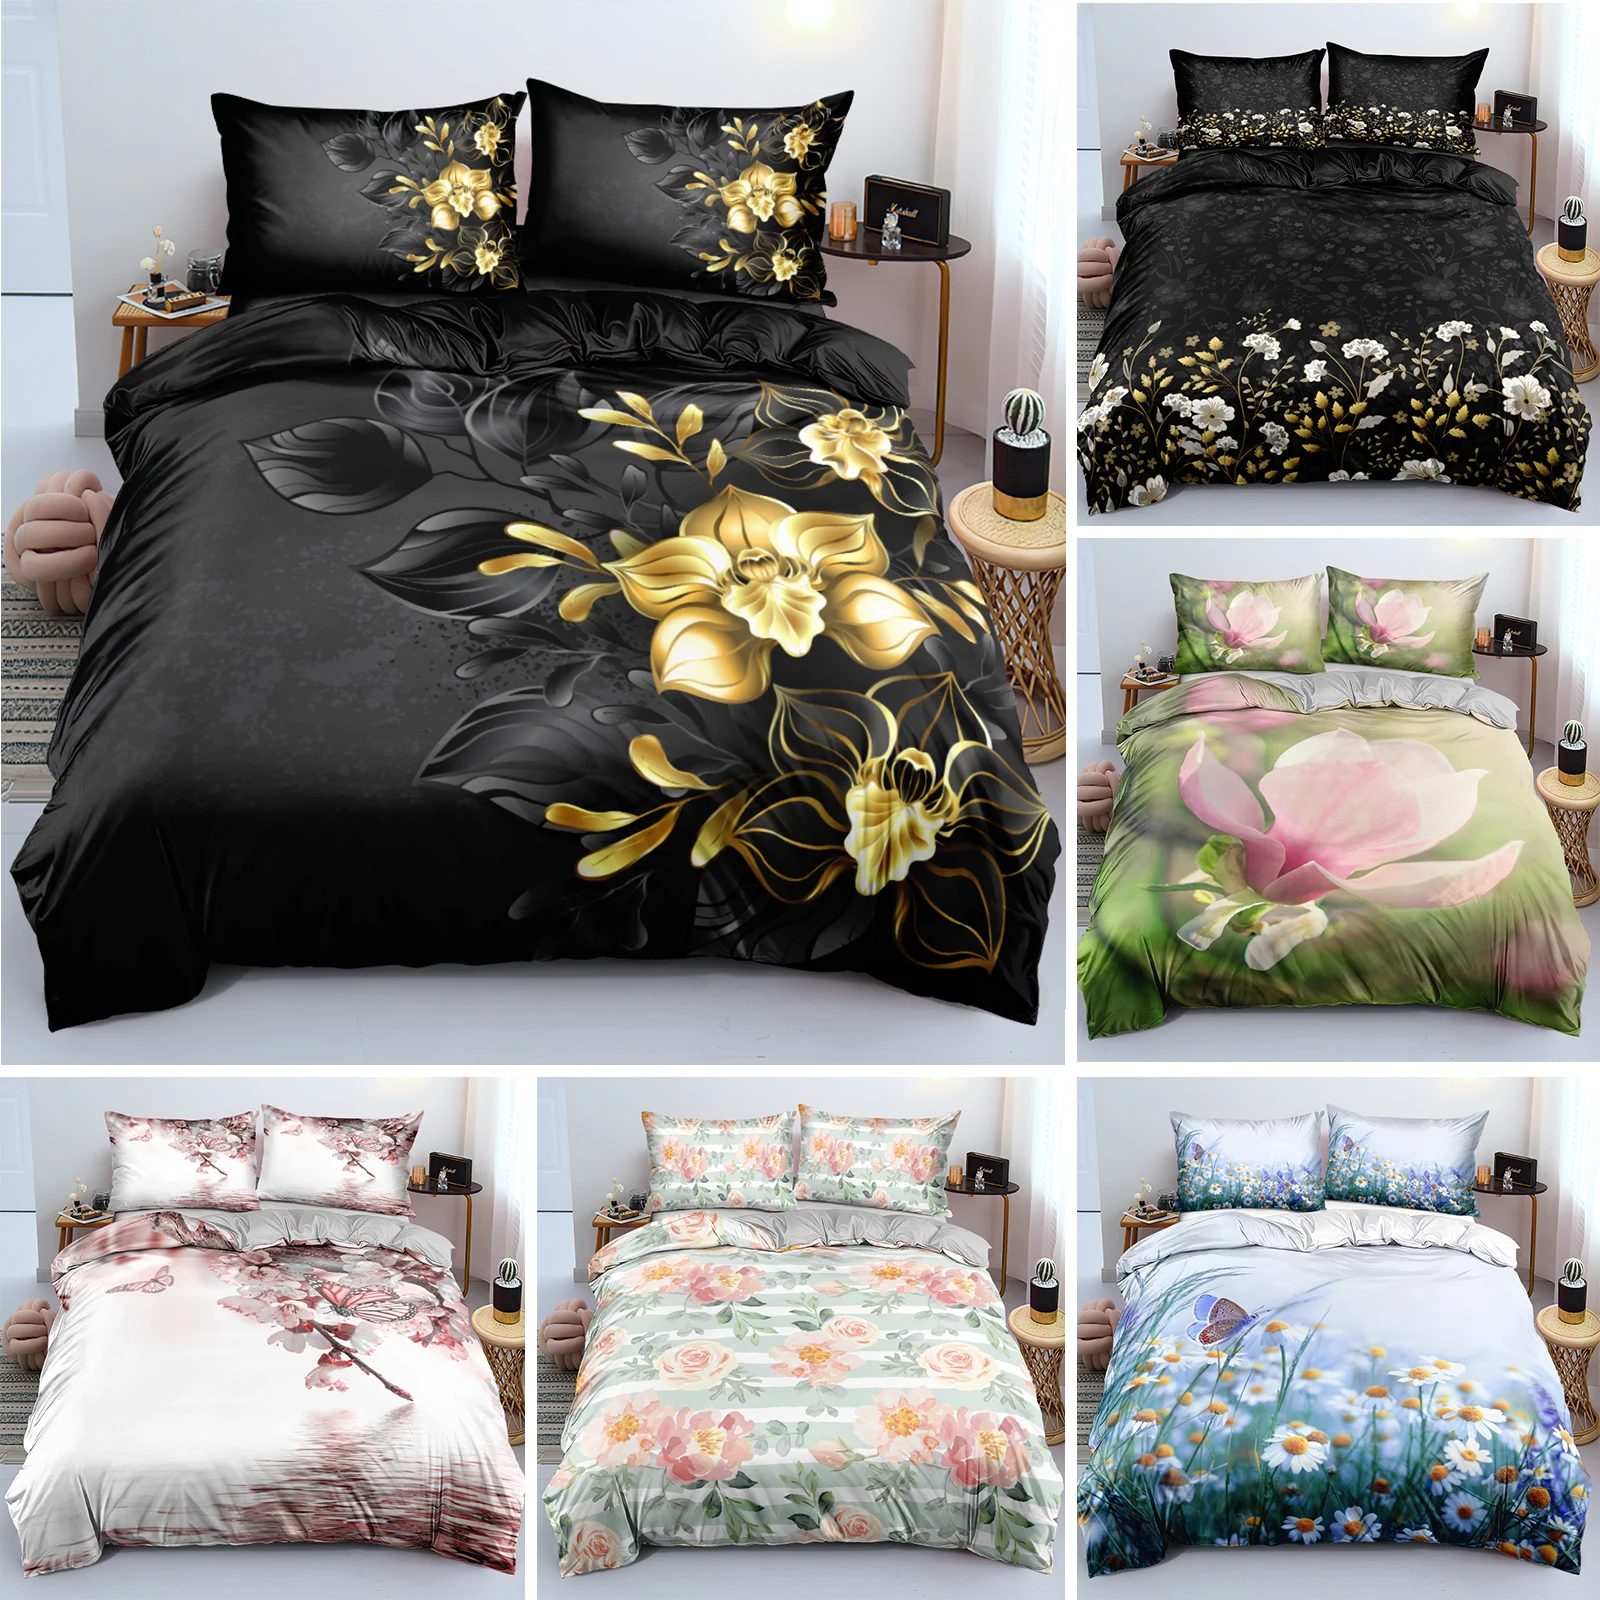 

3D Design Flowers Duvet Cover Bedding Set Quilt/Comforter Covers Pillowcases Double Twin Full Queen King Home Texitle Bedclothes